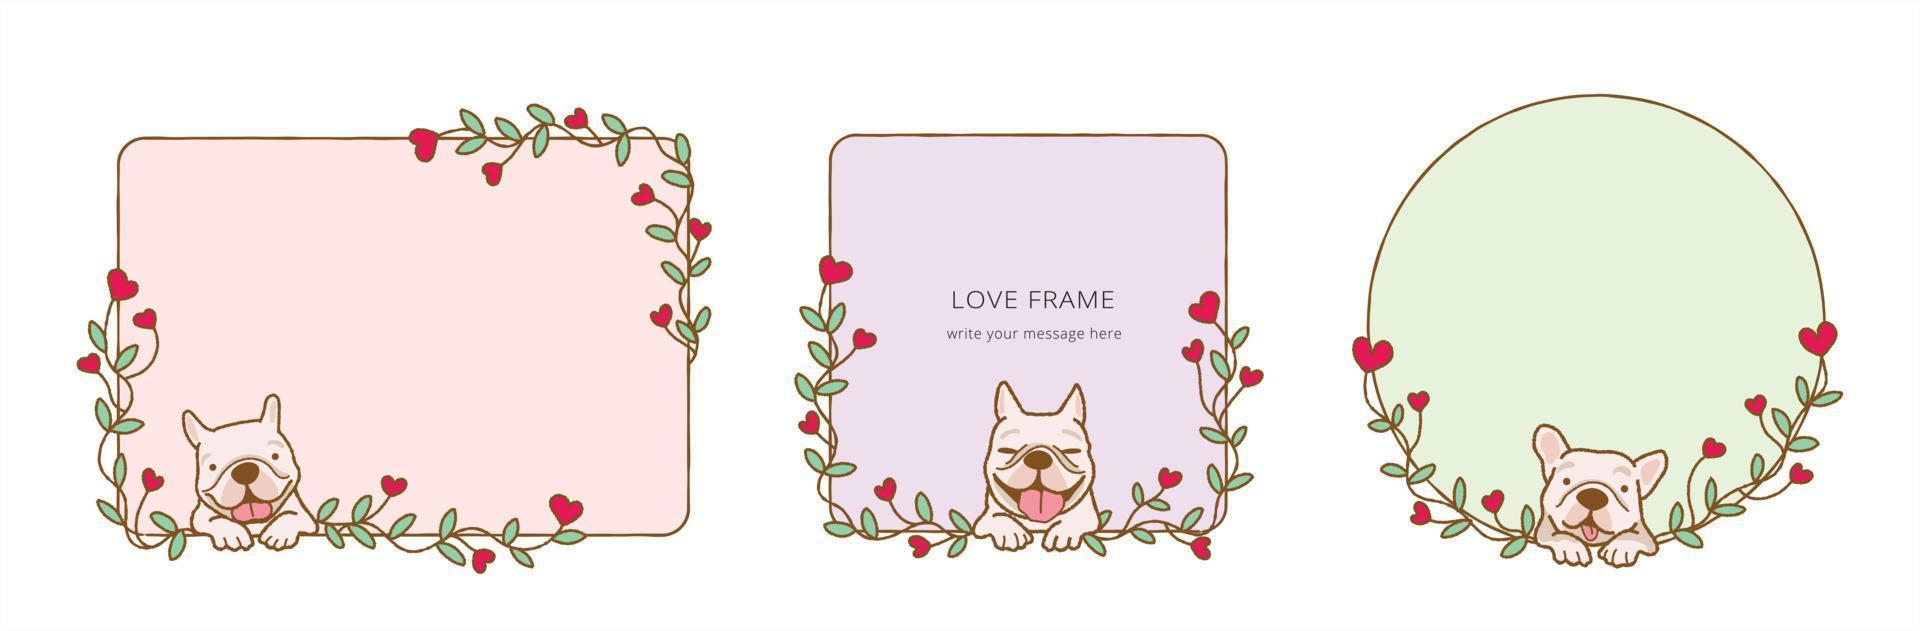 Frame with  Cartoon French Bulldog dog holding red rose flower in mouth, Lovely dog in love on valentines day gives gift illustration Frame vector